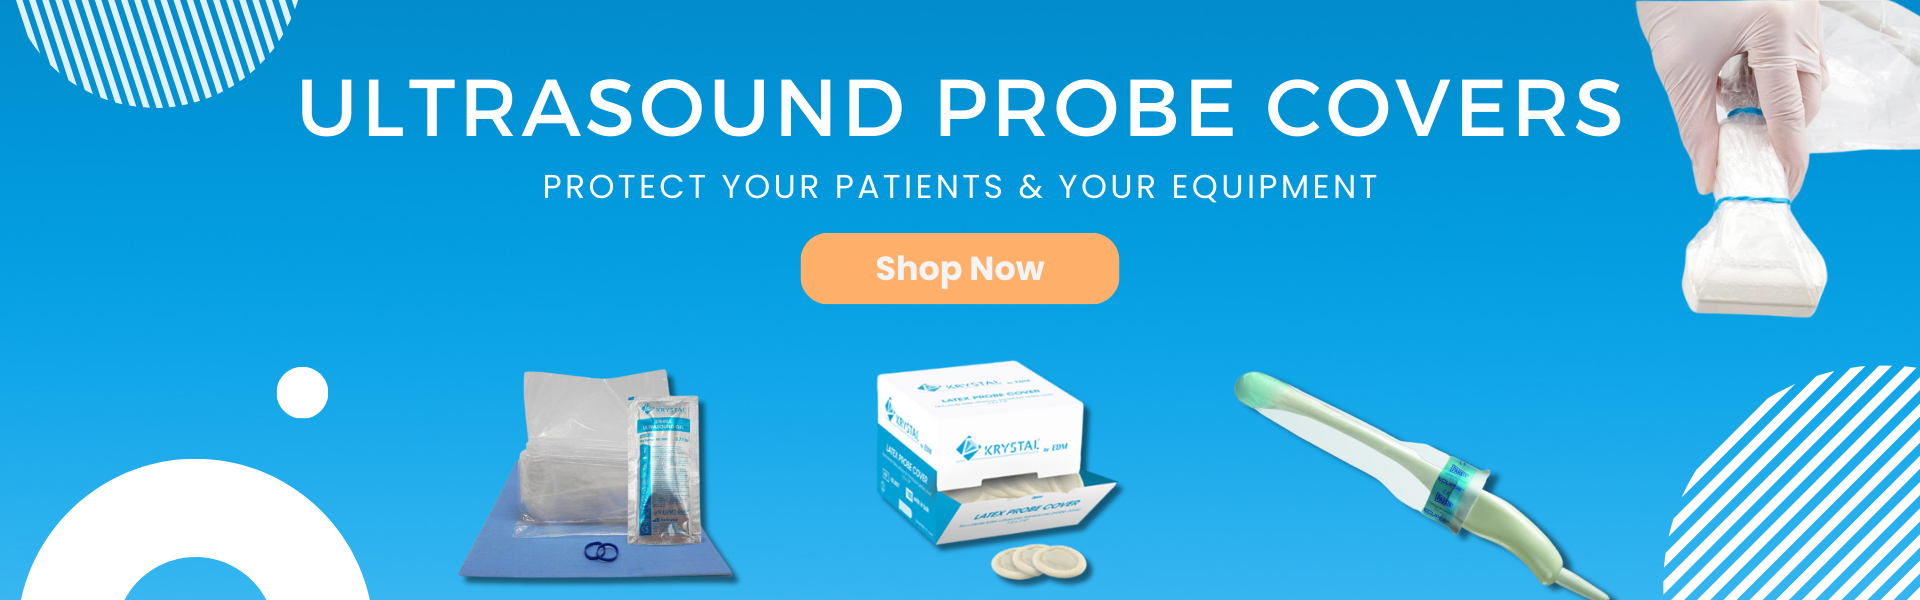 Discover our wide range of ultrasound probe covers - Protect your patients & your equipment with EDM